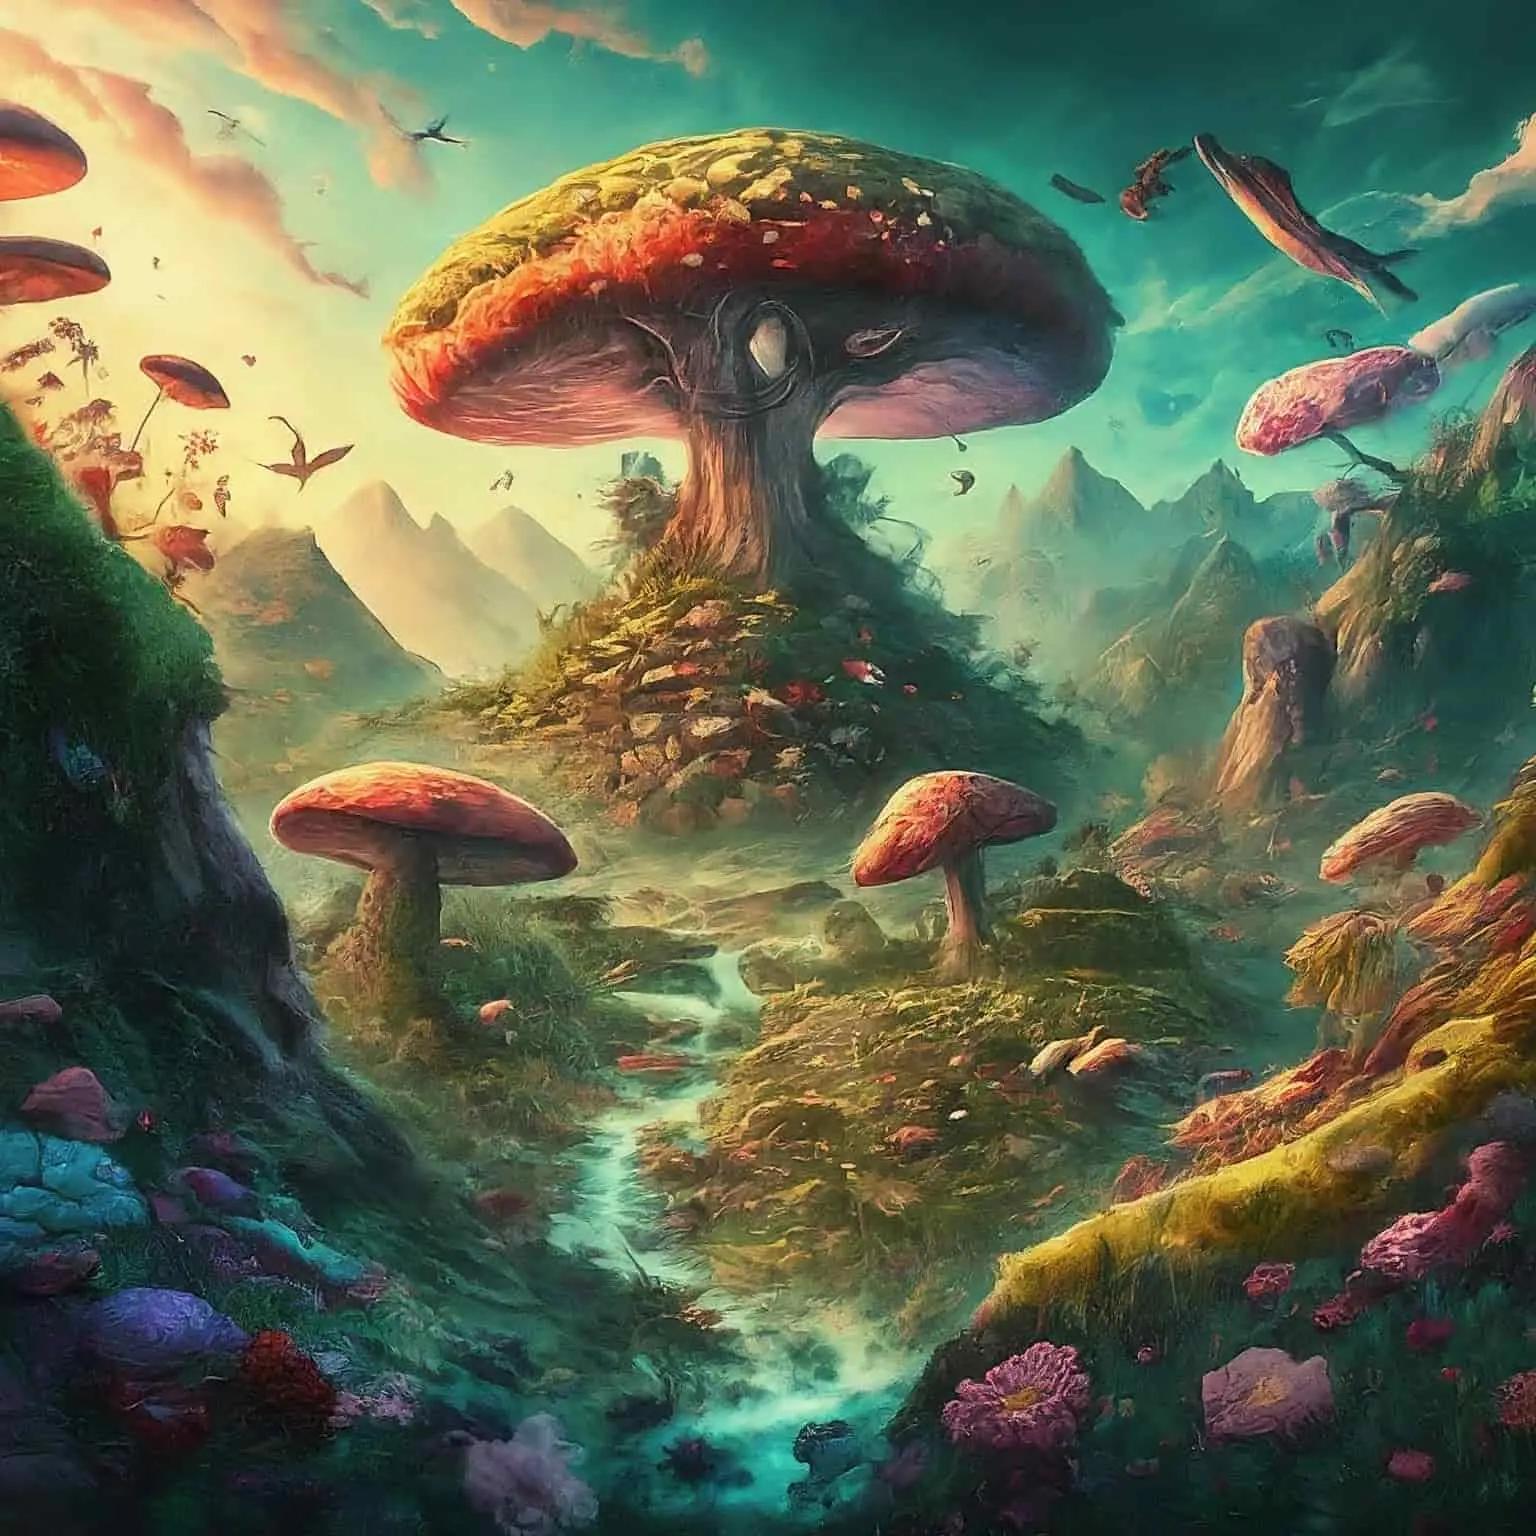 a landscape that matches with our main character, a frog, it is portraying a red big mushroom